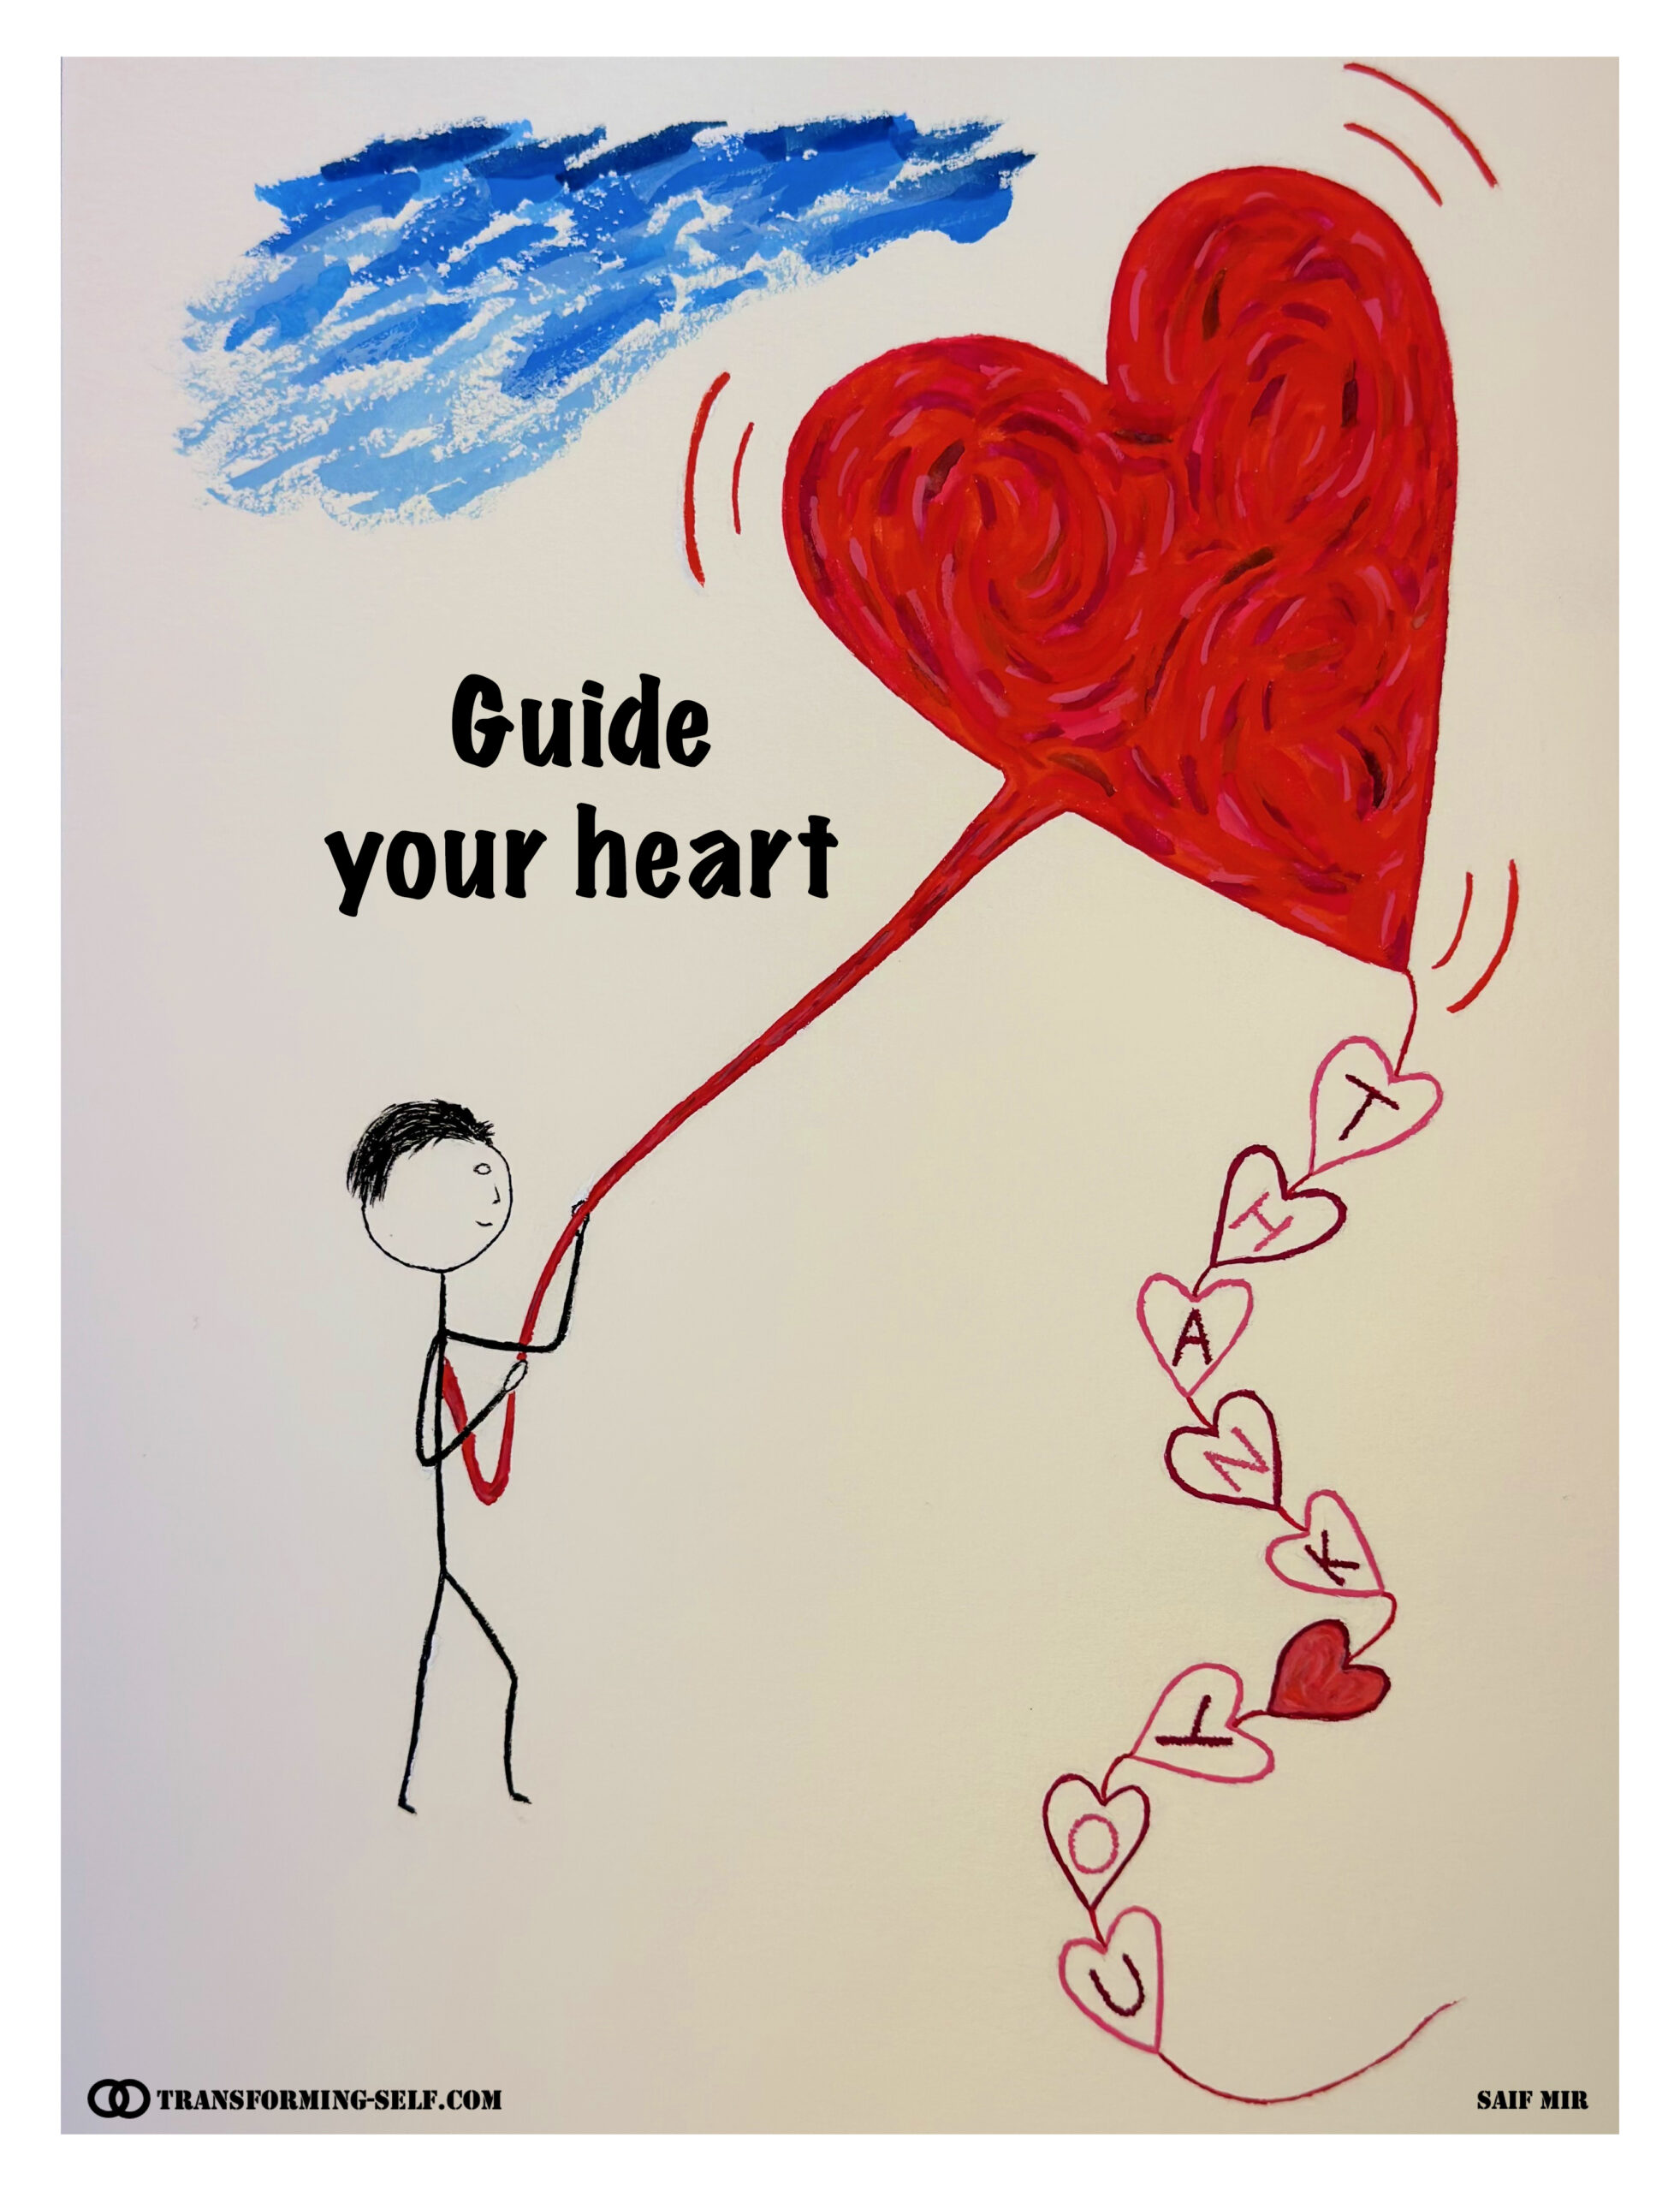 Guide your heart